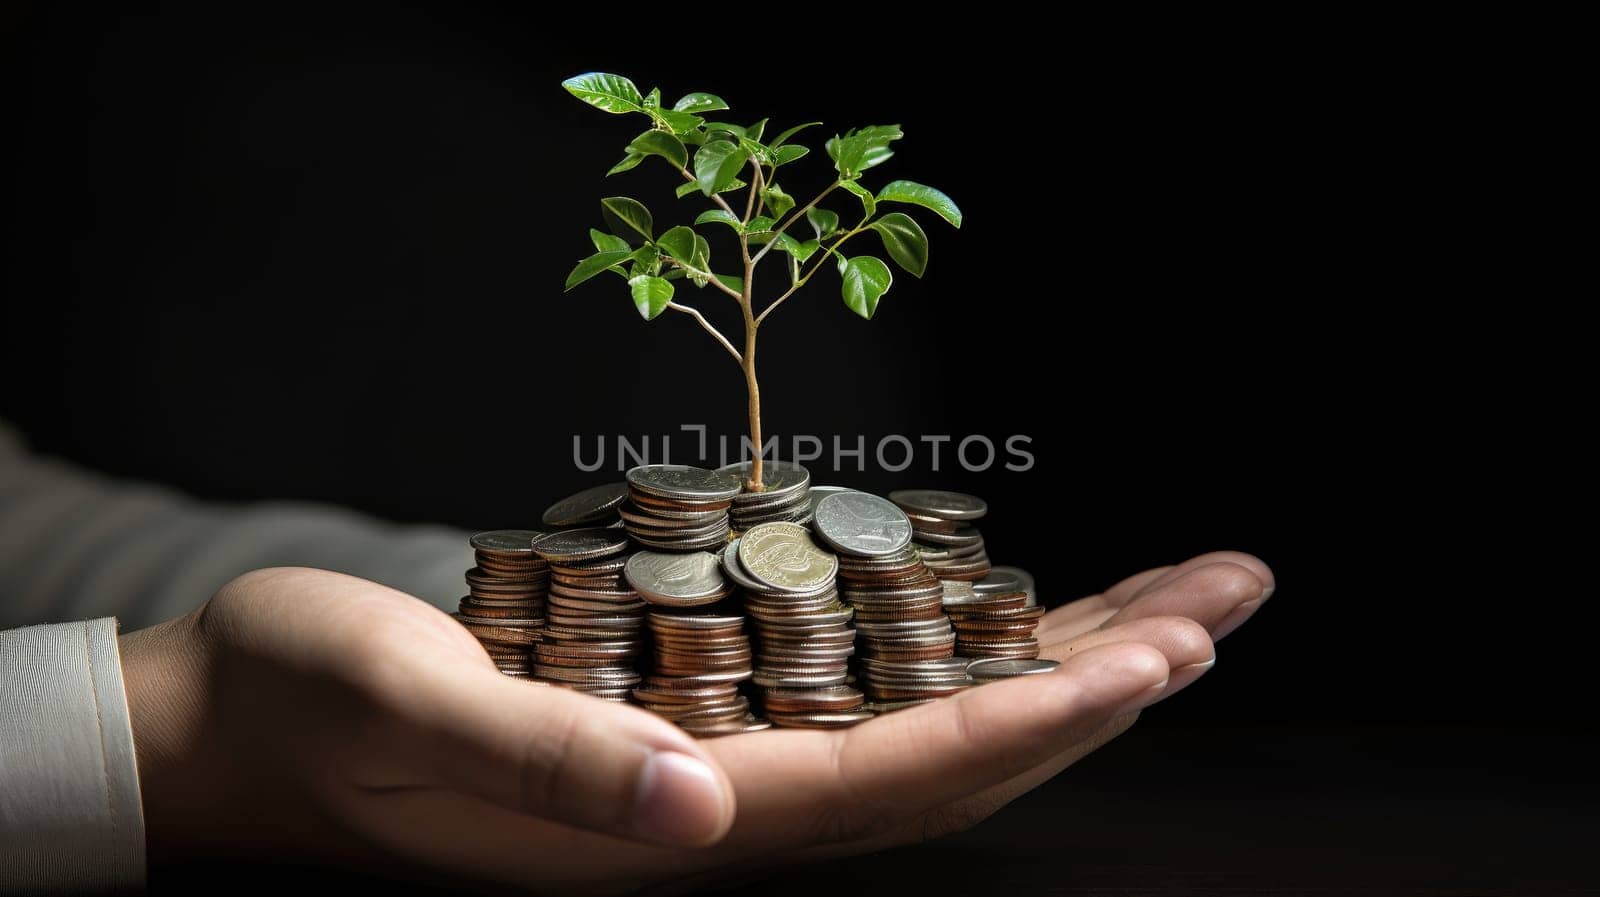 Sapling Grows on a Hand Holding Silver Coins. Green Business Ideas, Carbon Credits, and Innovative Investment in Eco-Friendly Initiatives. Concept of Environmentally Responsible Finance and Growth